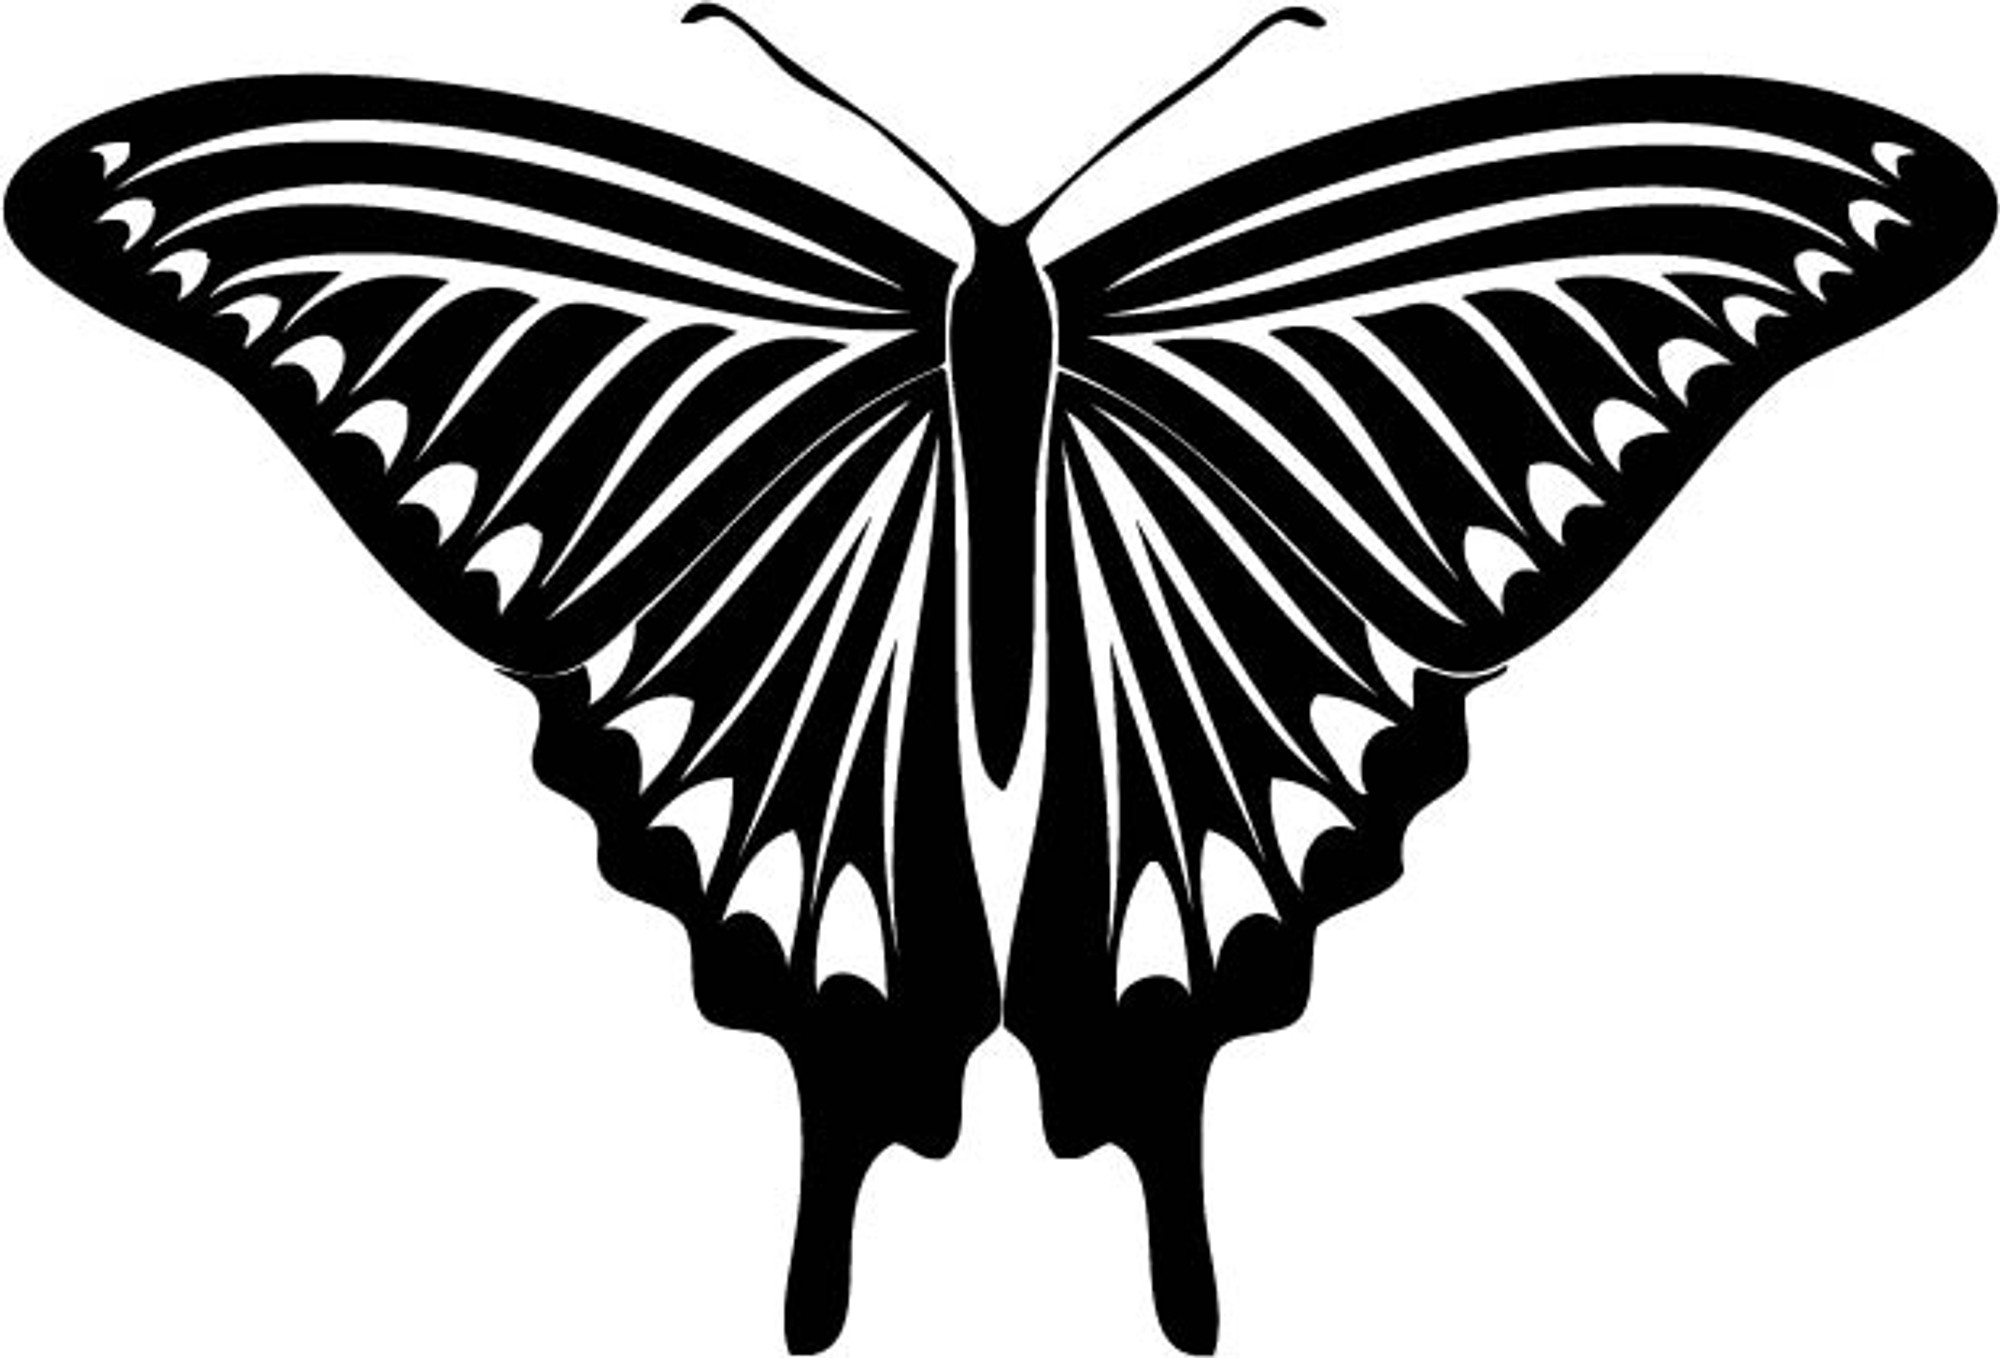 Insect Car Decals - Car Stickers | Butterfly Car Decal 17 | AnyDecals.com